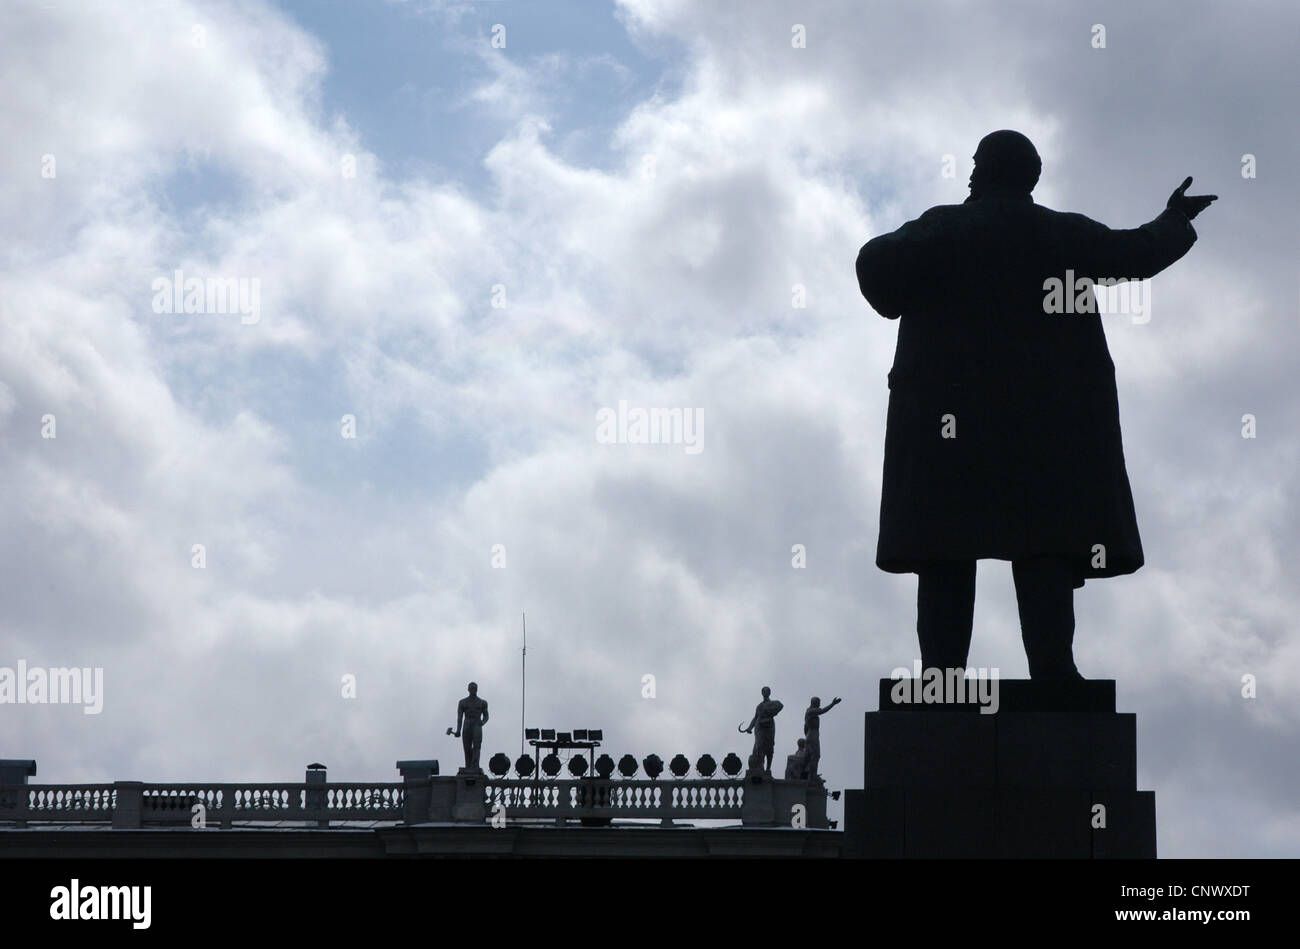 Lenin Monument in front of Yekaterinburg City Hall on Year 1905 Square in Yekaterinburg, Russia. Stock Photo